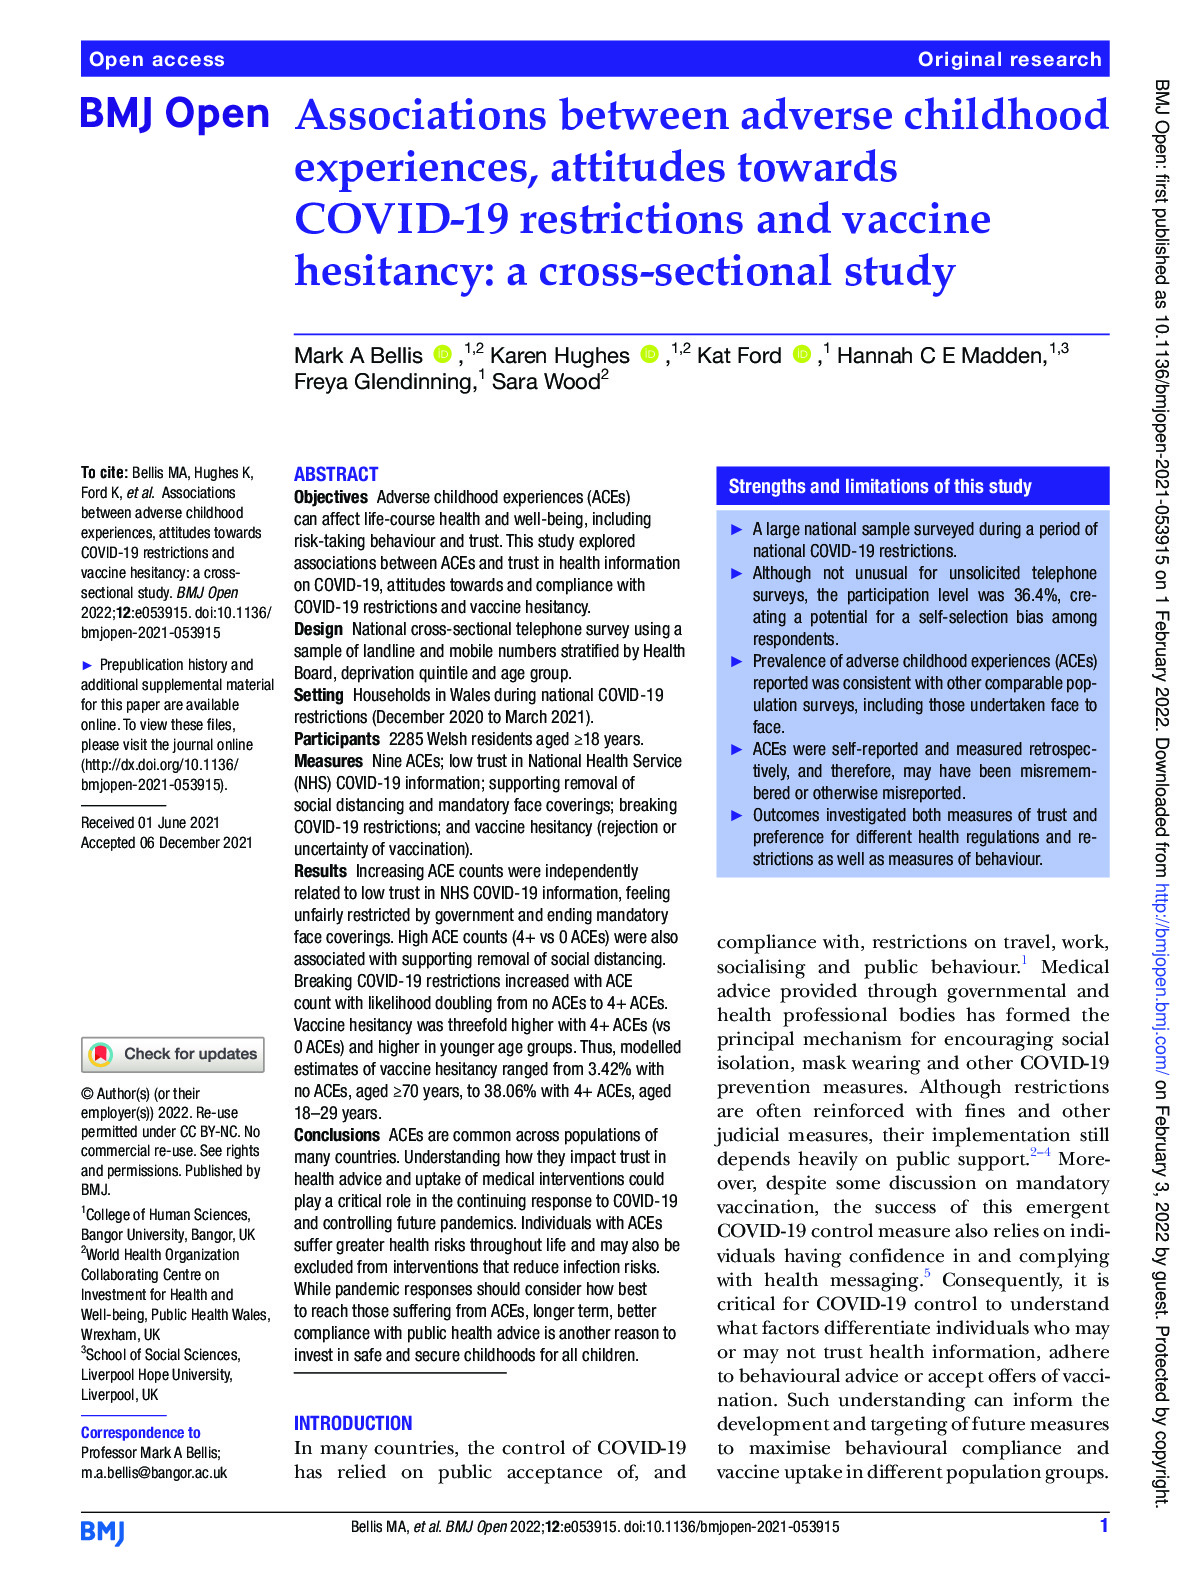 Associations between ACEs, attitudes to COVID-19 restrictions and Vaccine hesitancy 2022